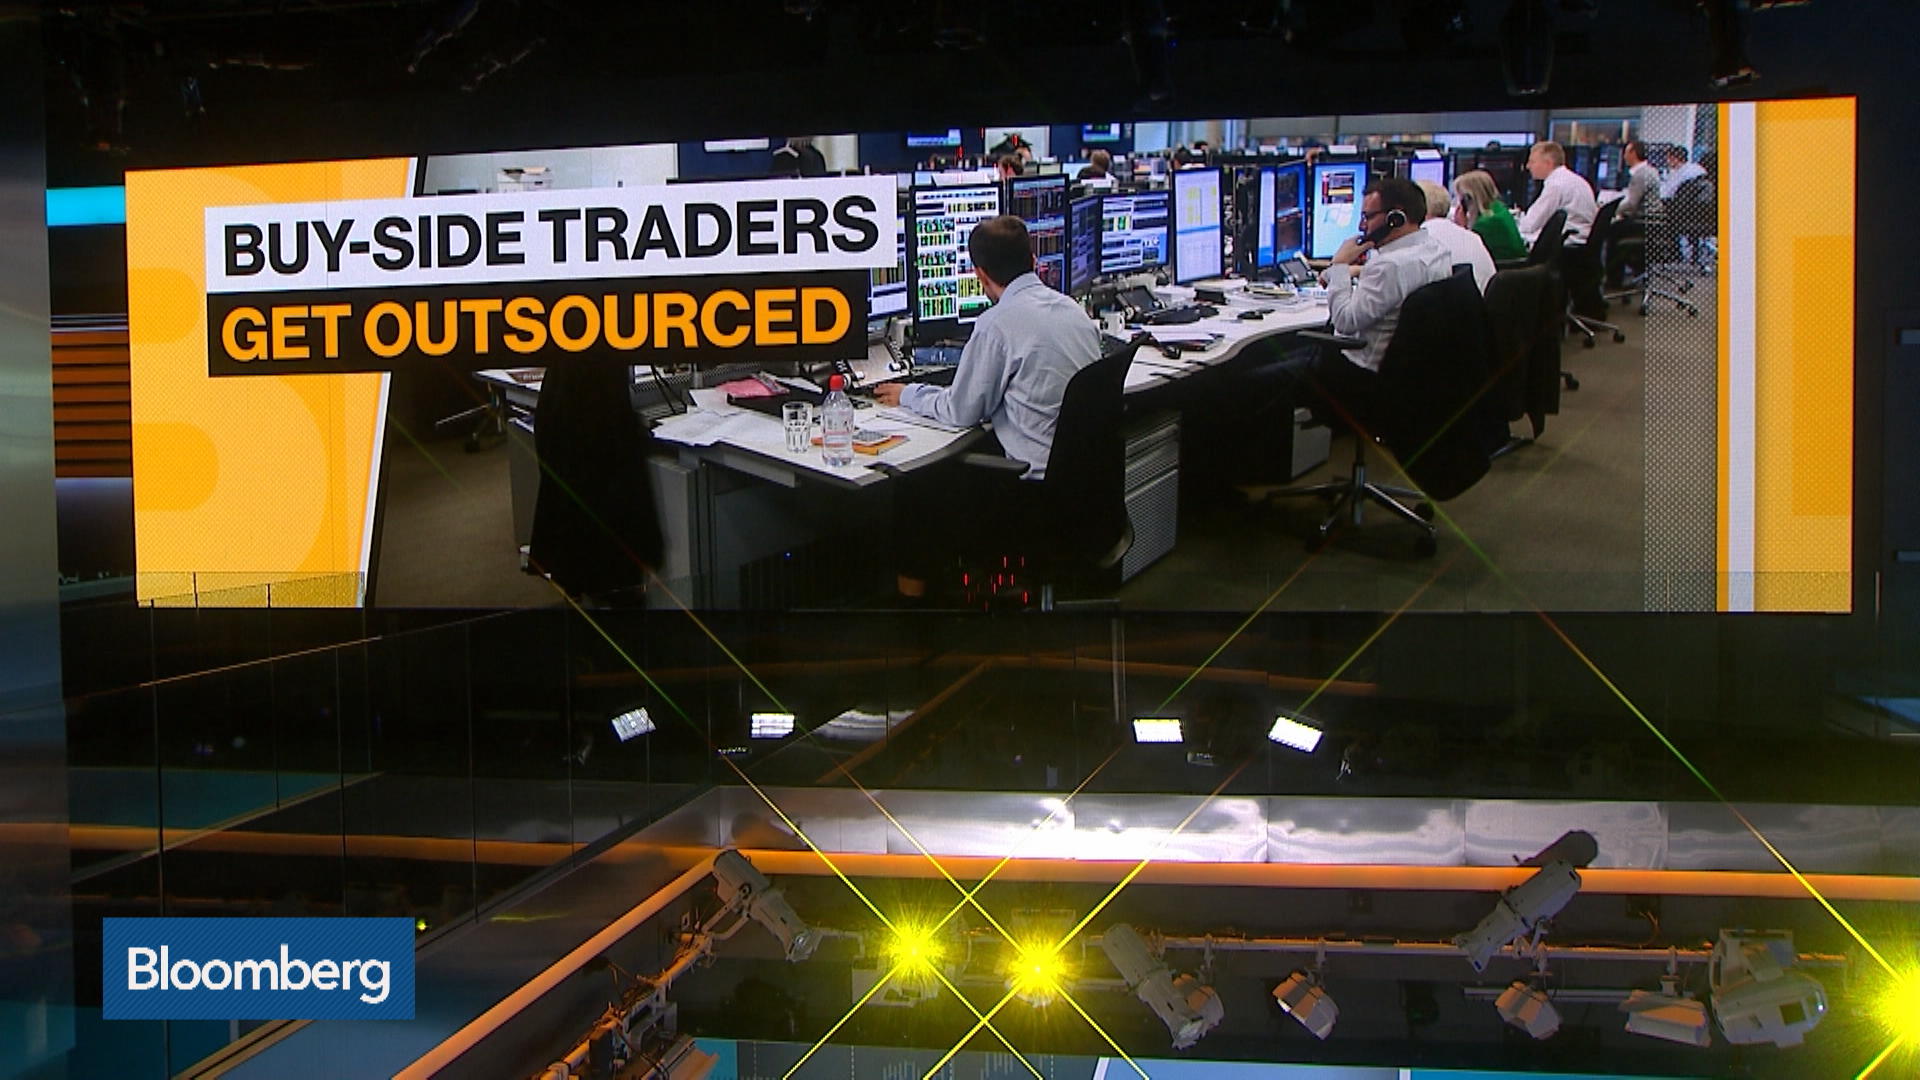 The Buy Side Trader Is Latest Job To Be Outsourced As Costs Rise